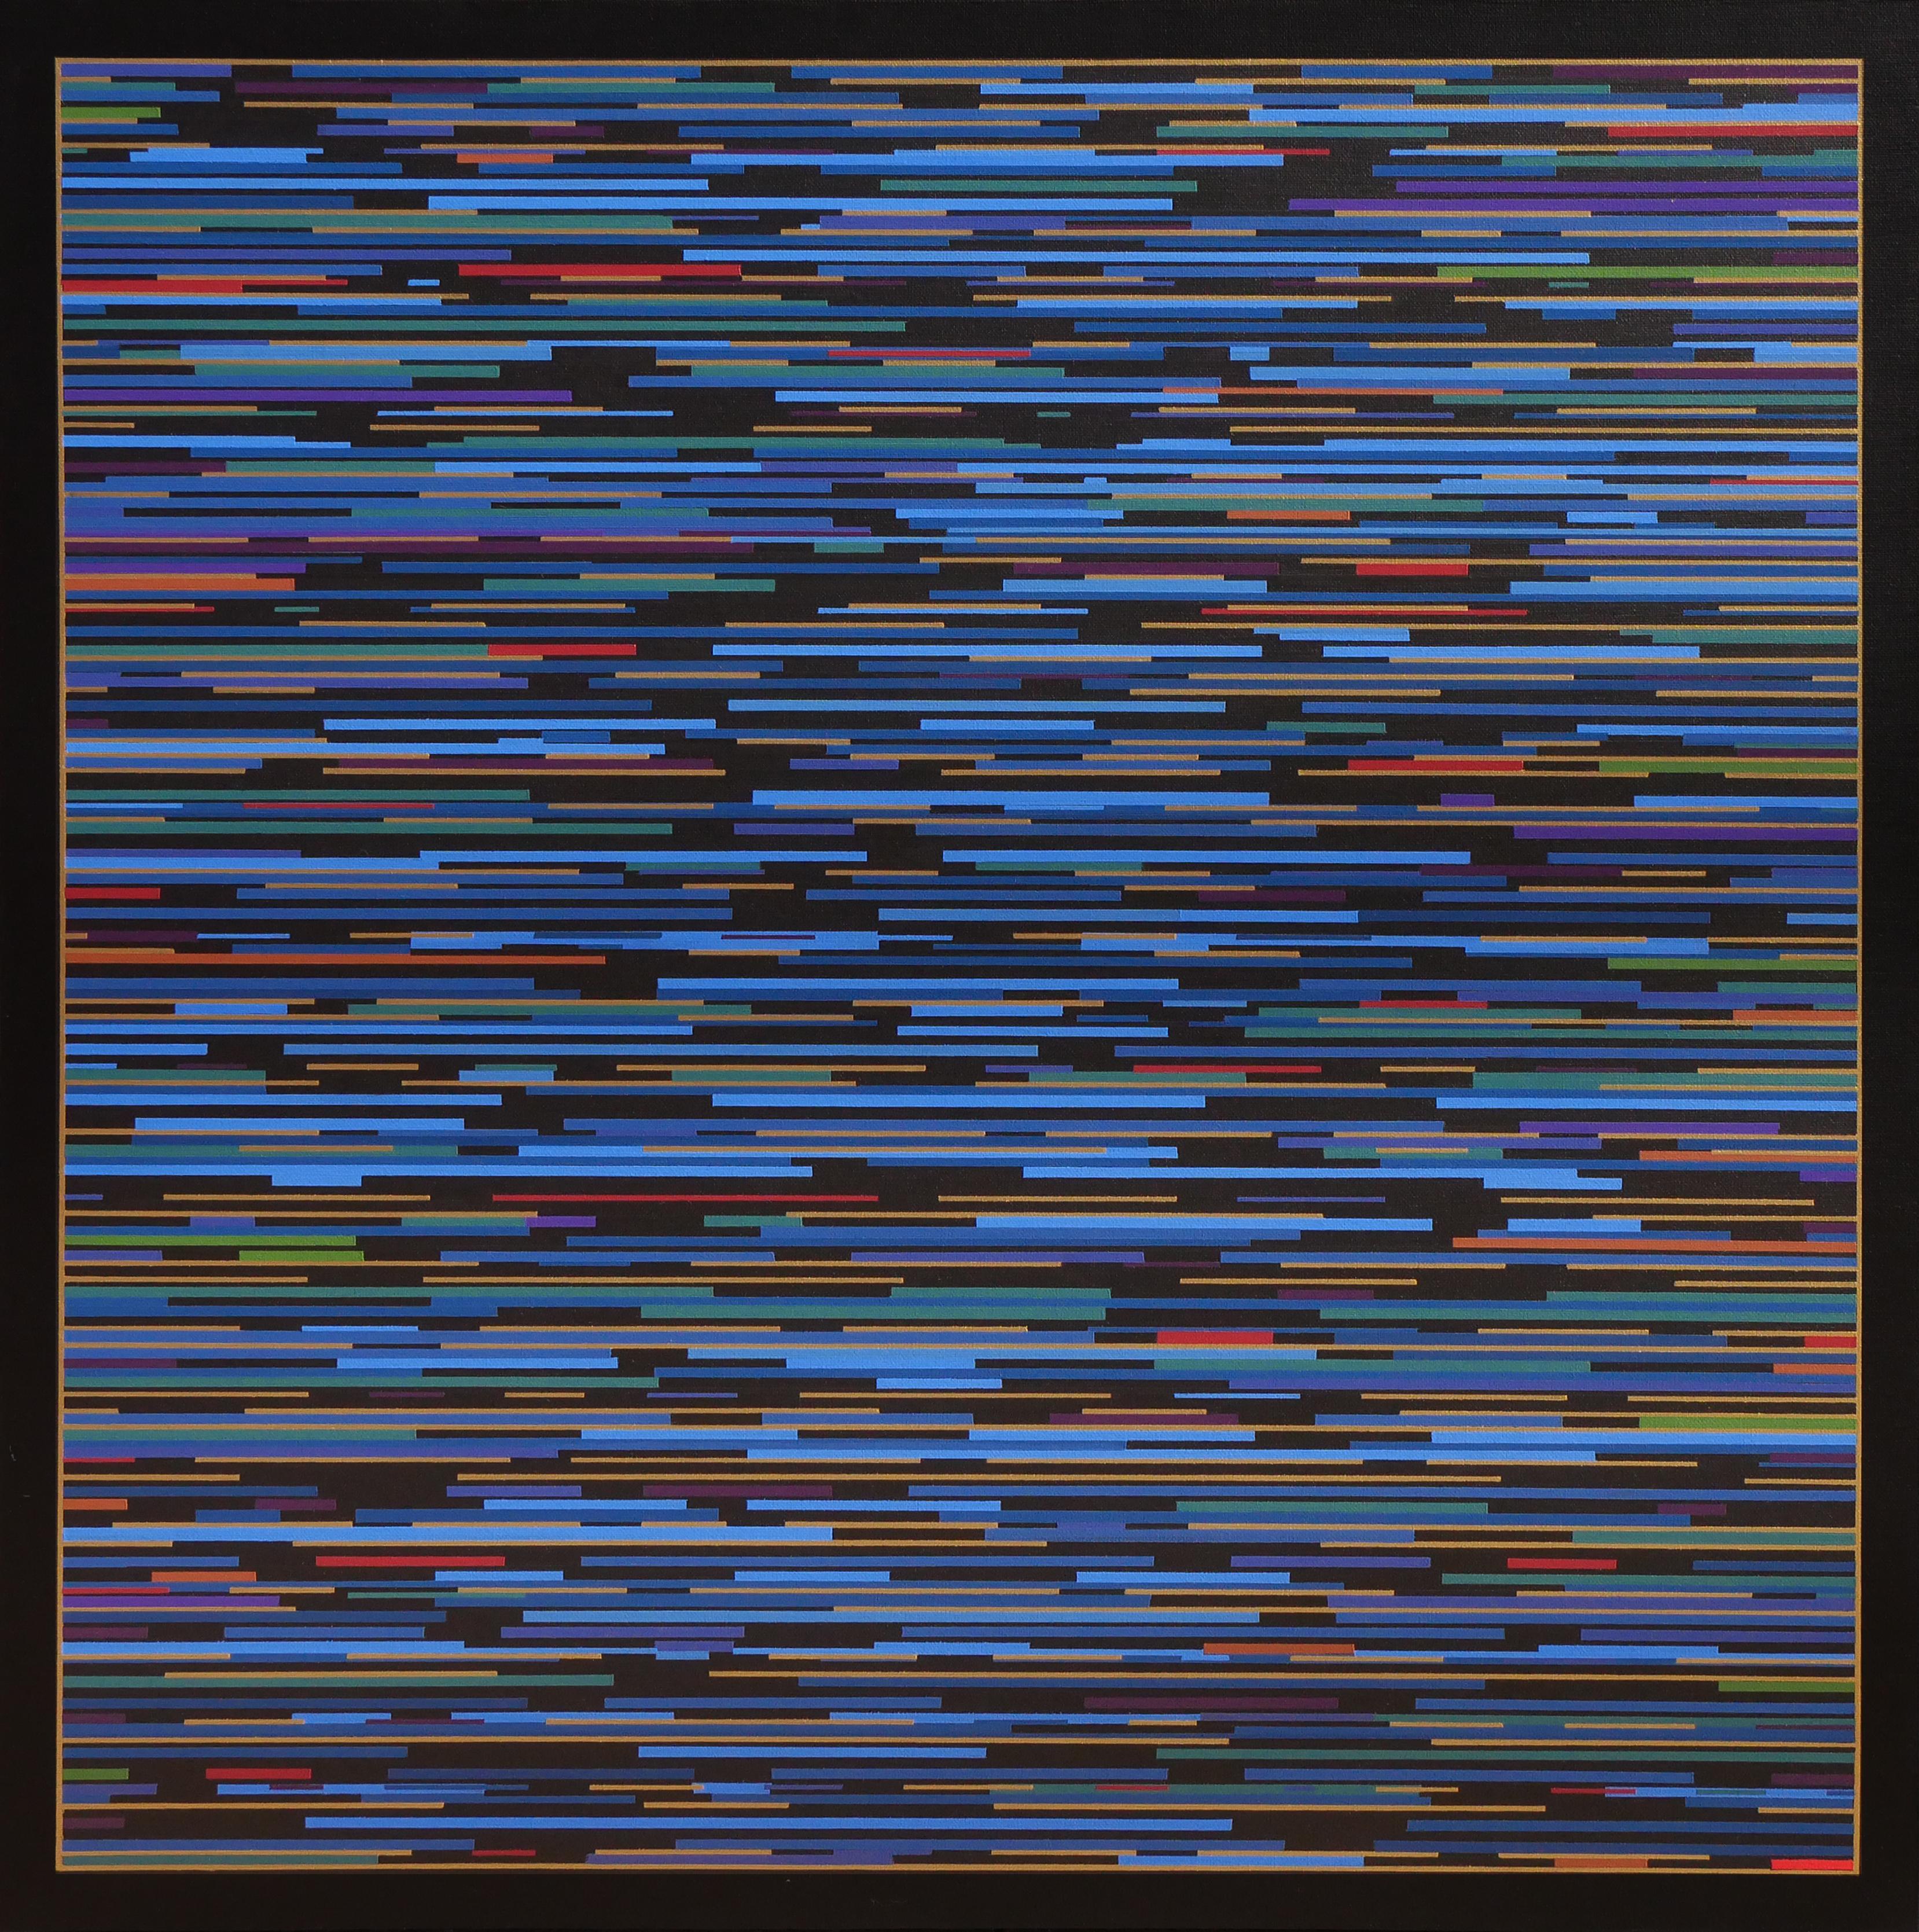 Contemporary abstract geometric painting by artist Mark Byckowski. The work is featured in a series of paintings. The work features horizontal lines with a variety of vivid colors of blue, purple, red, and green, painted on a black background. Each